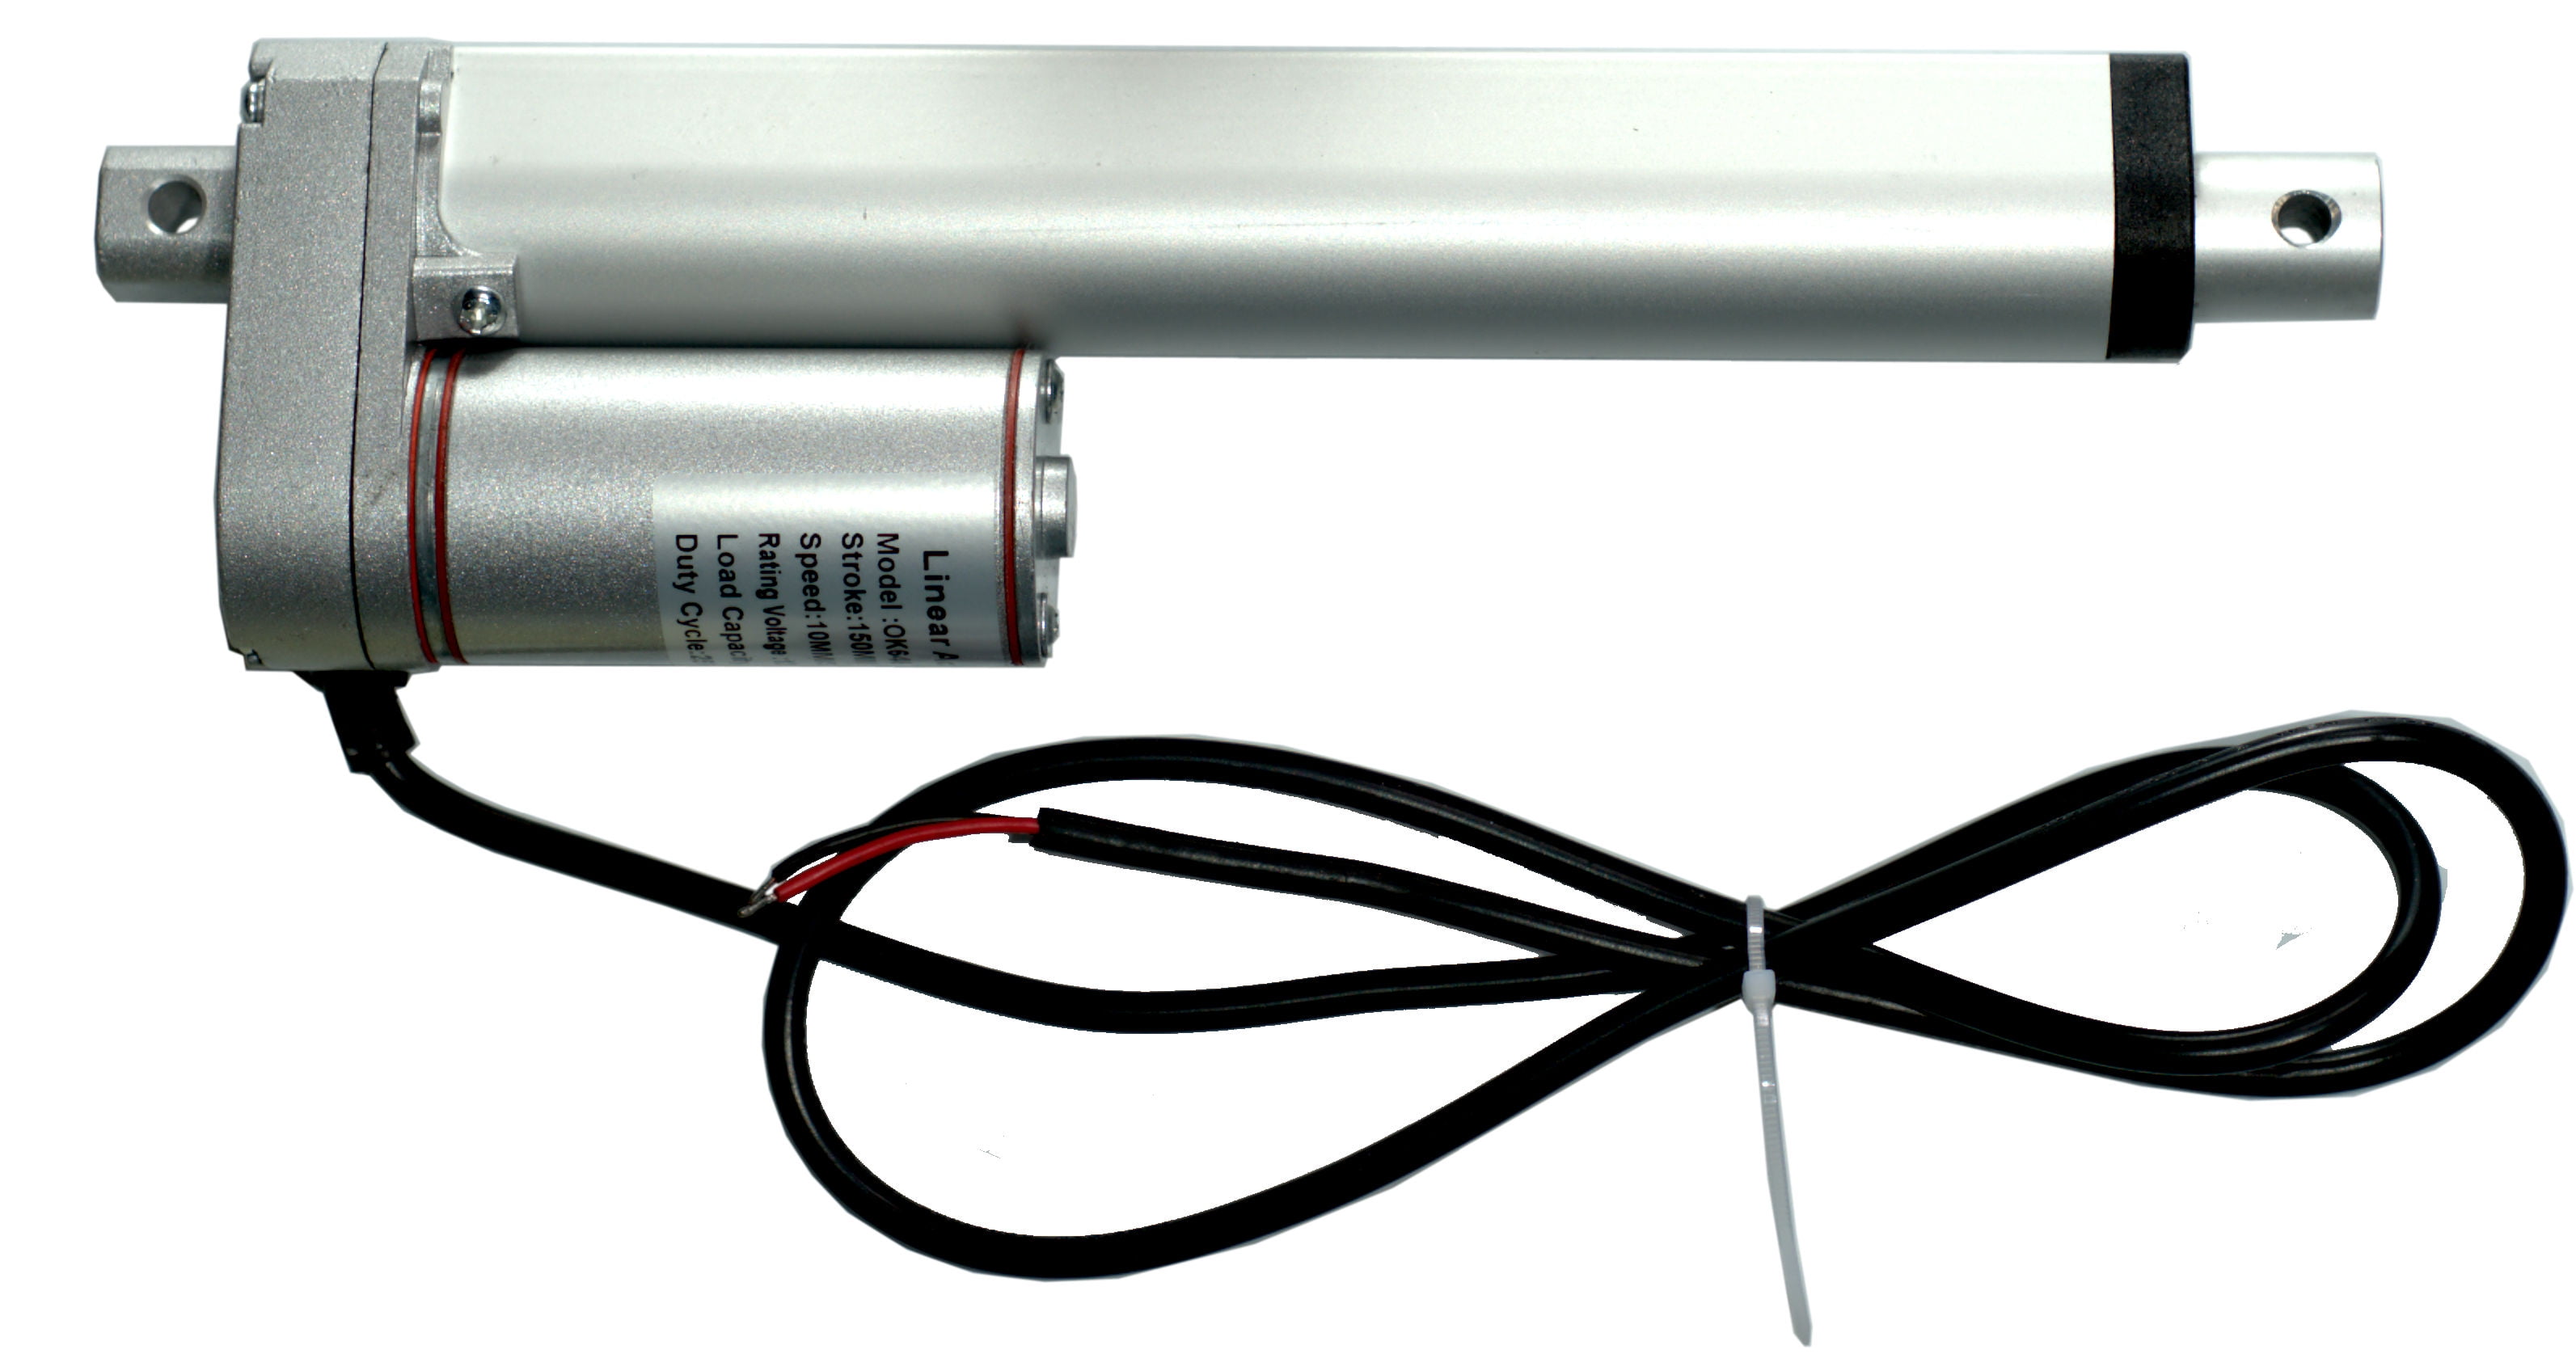 6 Inch Linear Actuator Kit:12-v w/ 225 lbs max load:Includes Wiring Switch Kit 